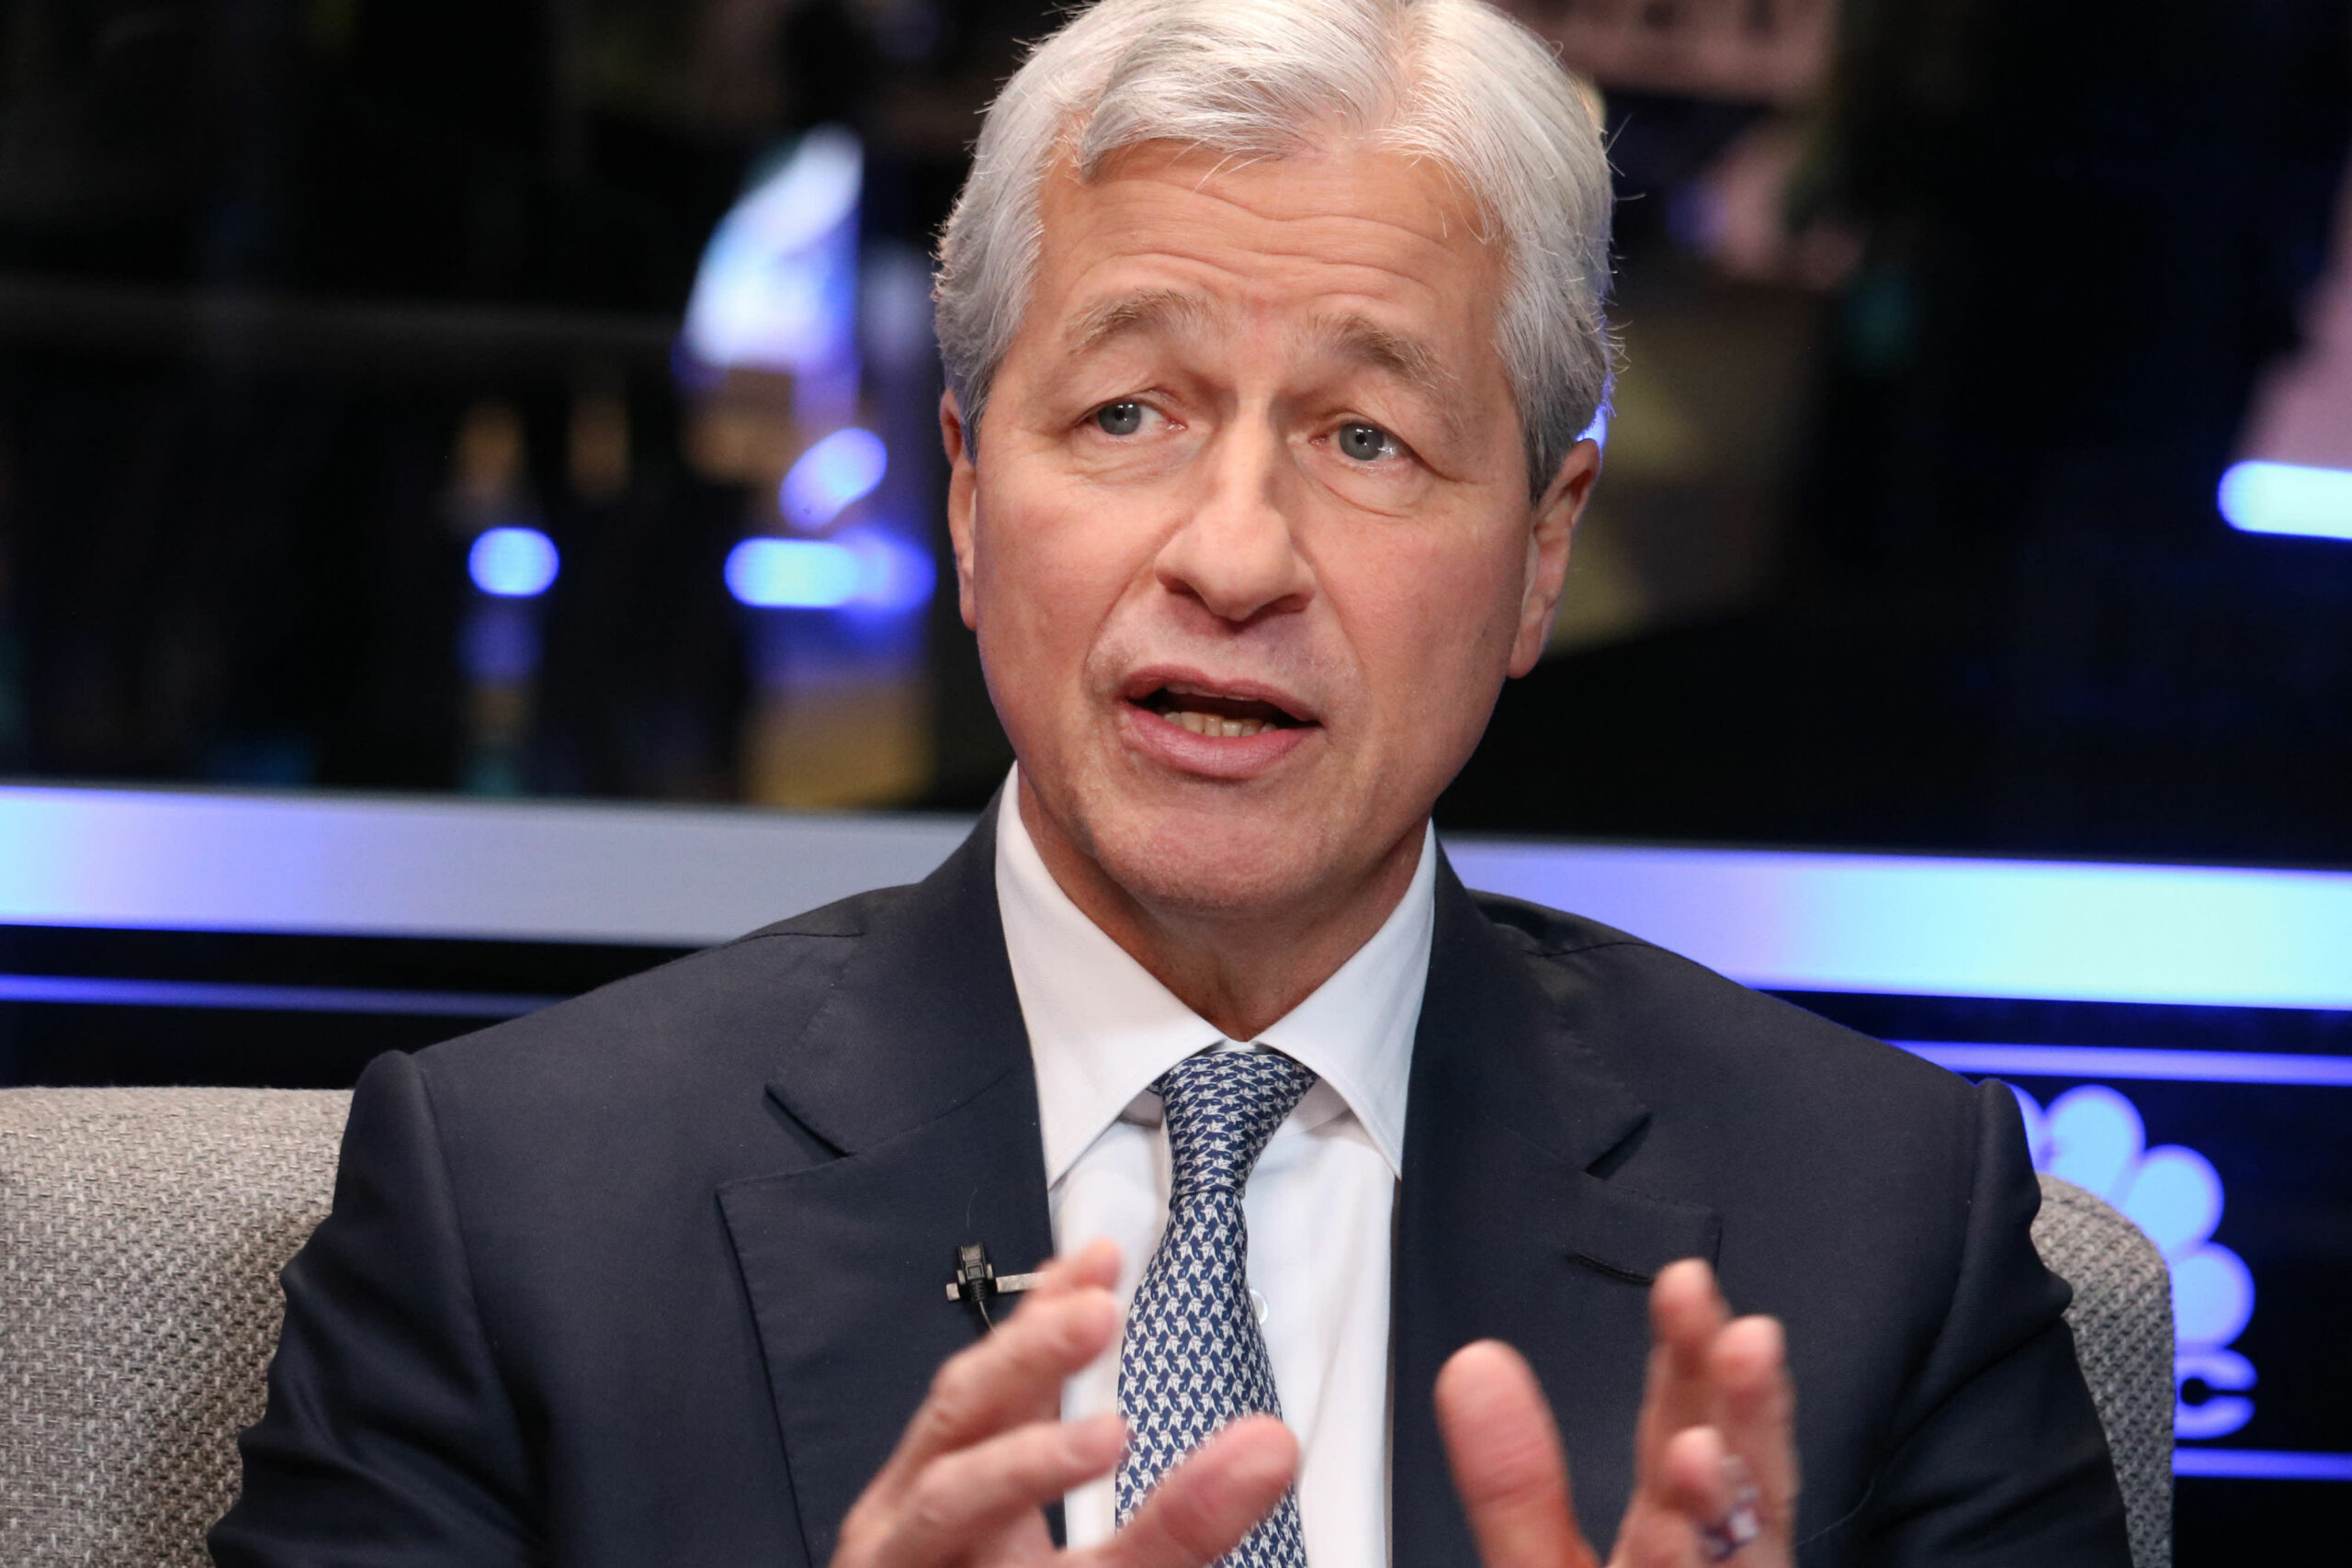 JPMorgan launches Morgan Well being after Amazon-Berkshire Hathaway enterprise collapse